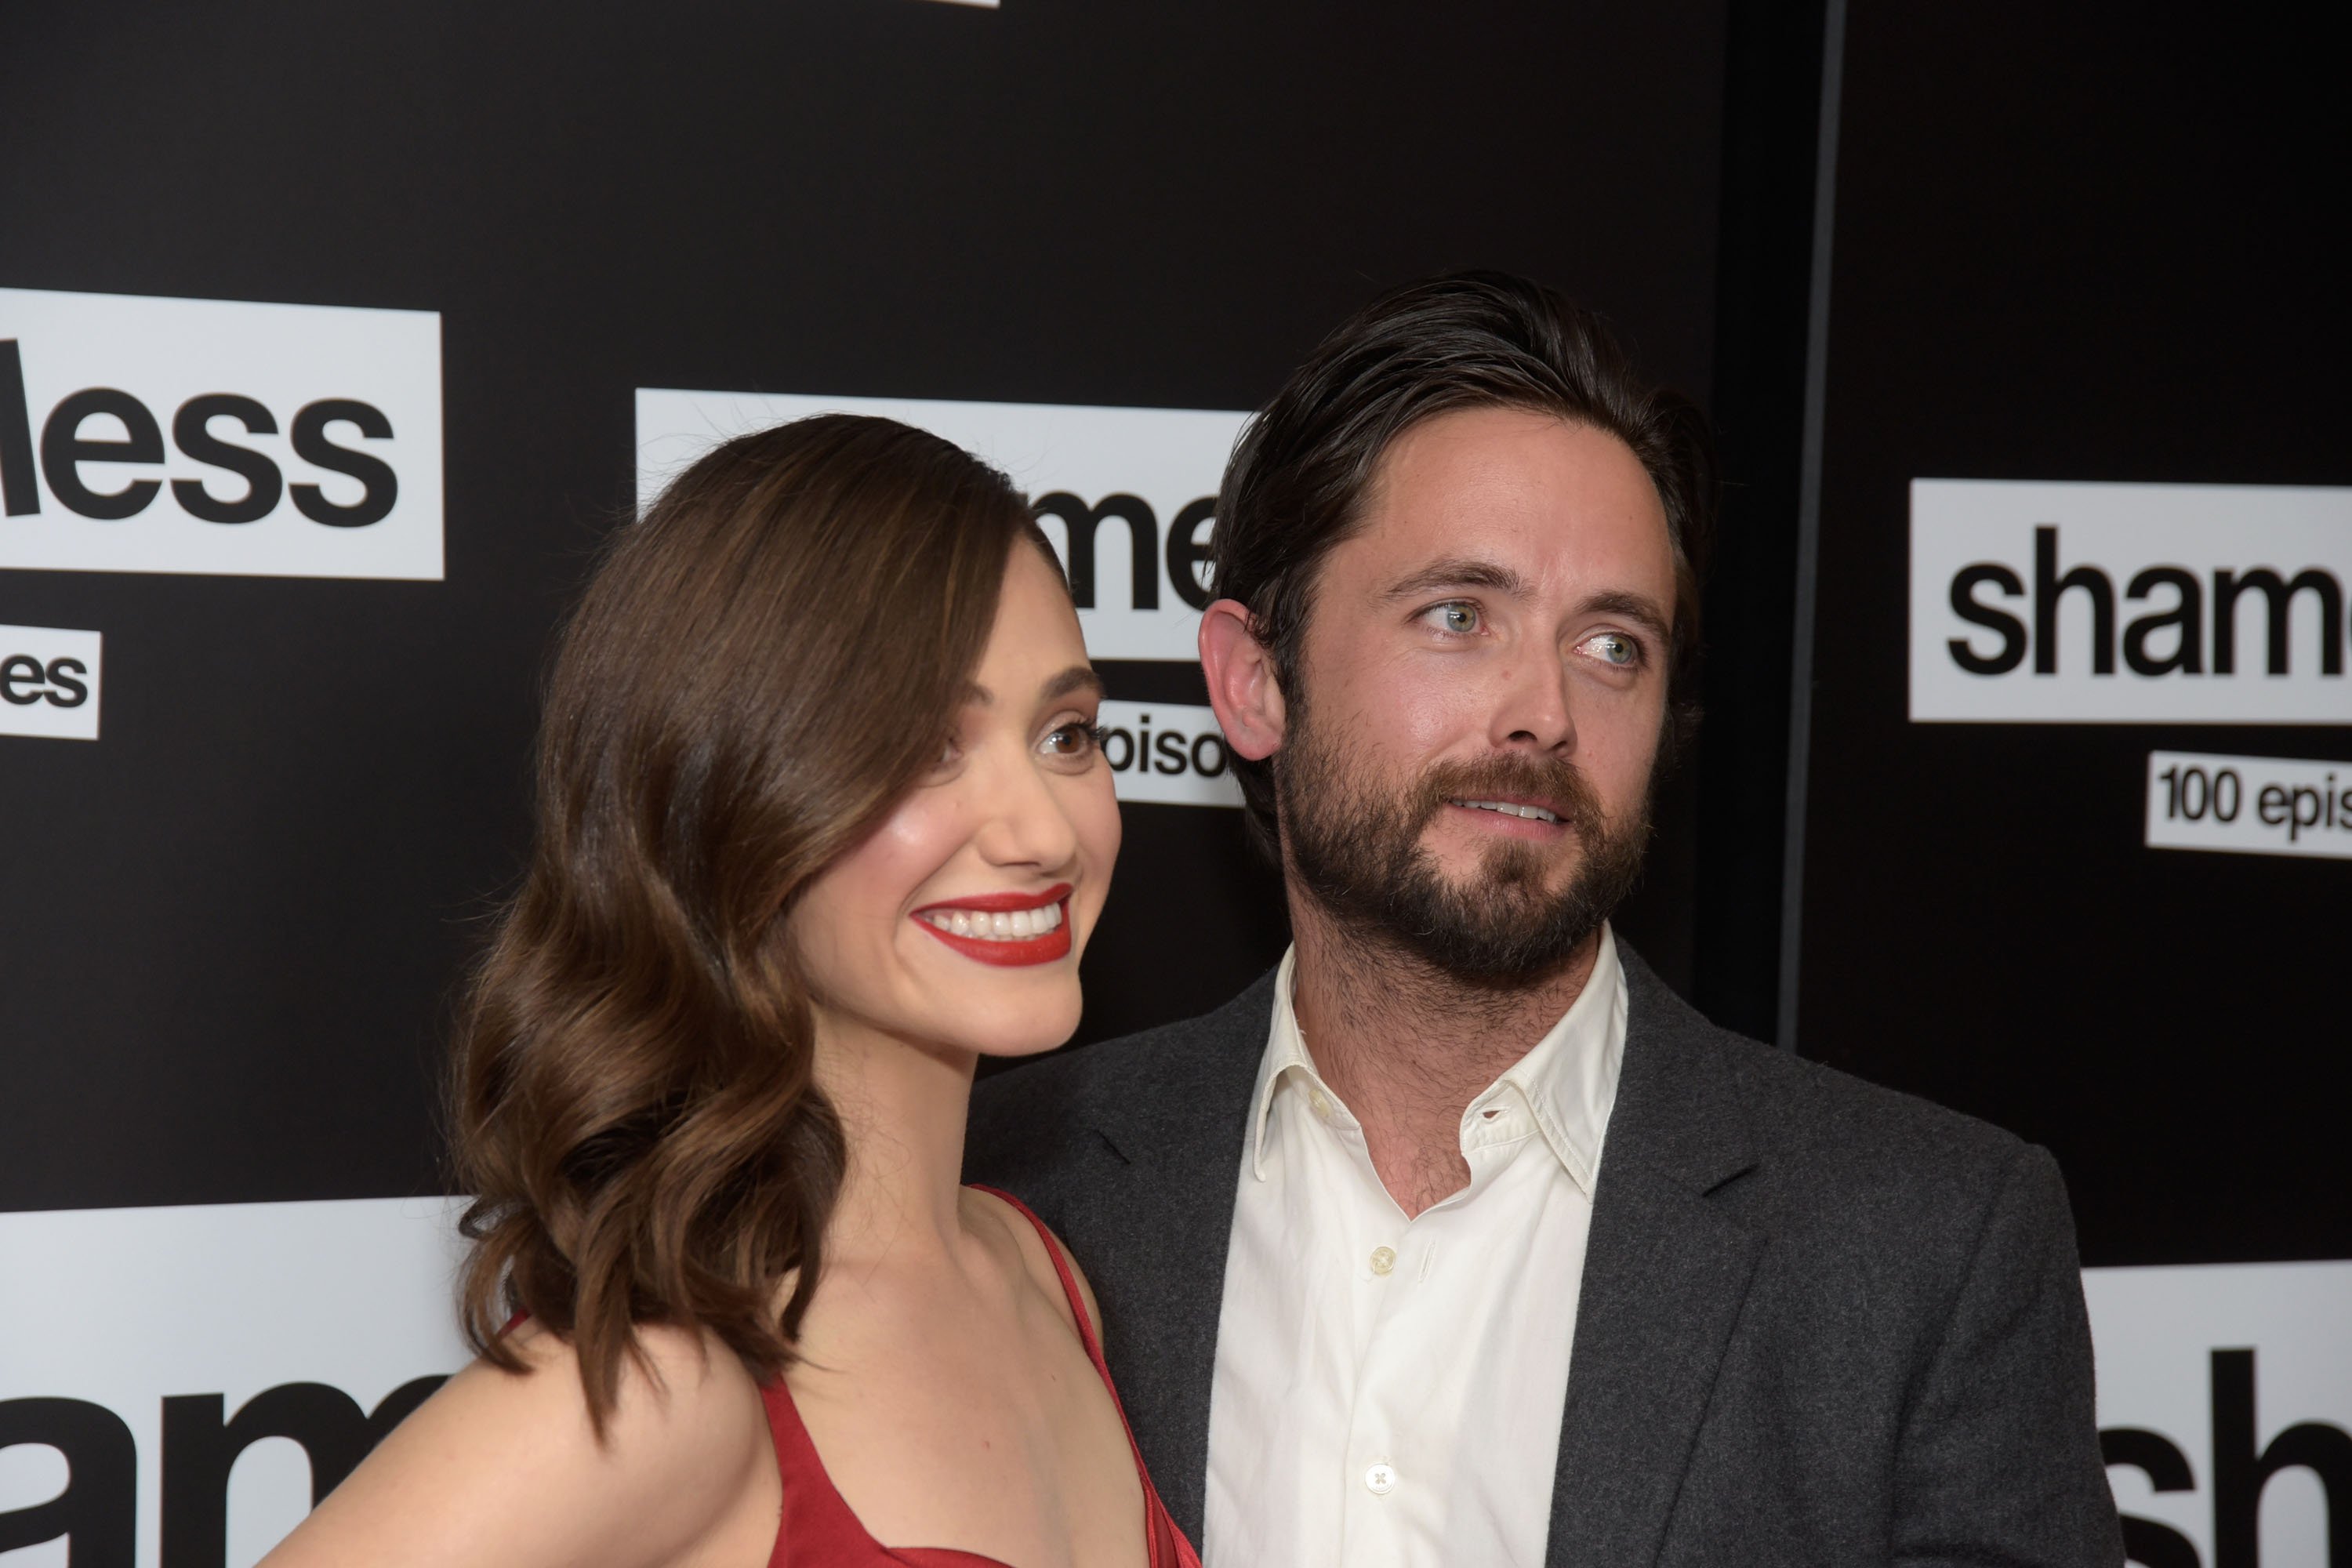 Emmy Rossum and Justin Chatwin at 'Shameless' premiere.